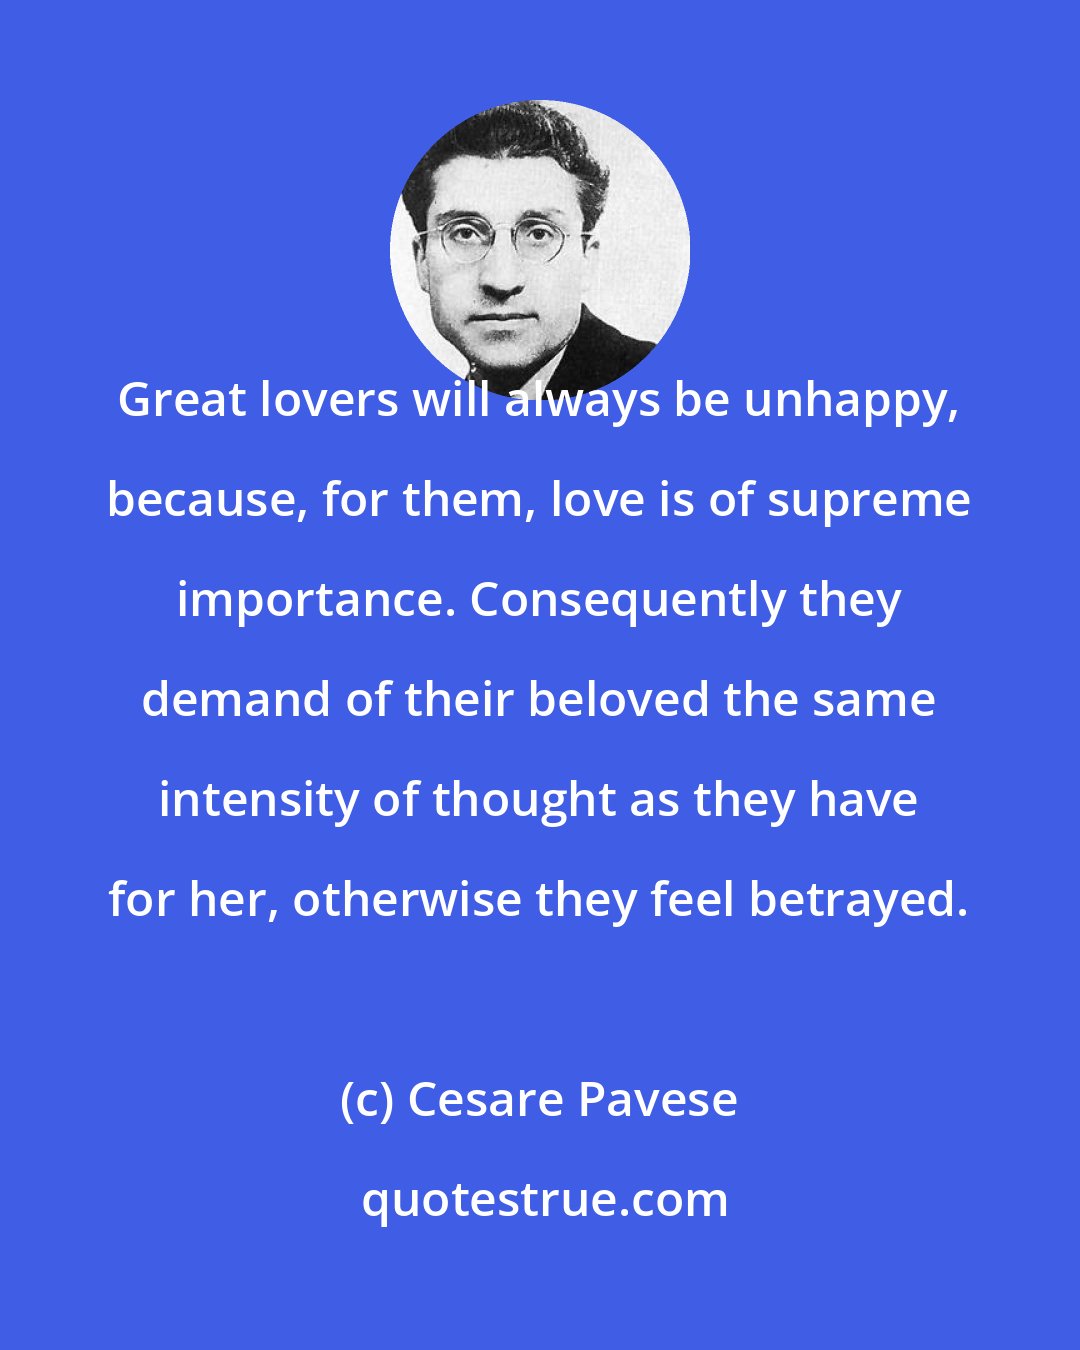 Cesare Pavese: Great lovers will always be unhappy, because, for them, love is of supreme importance. Consequently they demand of their beloved the same intensity of thought as they have for her, otherwise they feel betrayed.